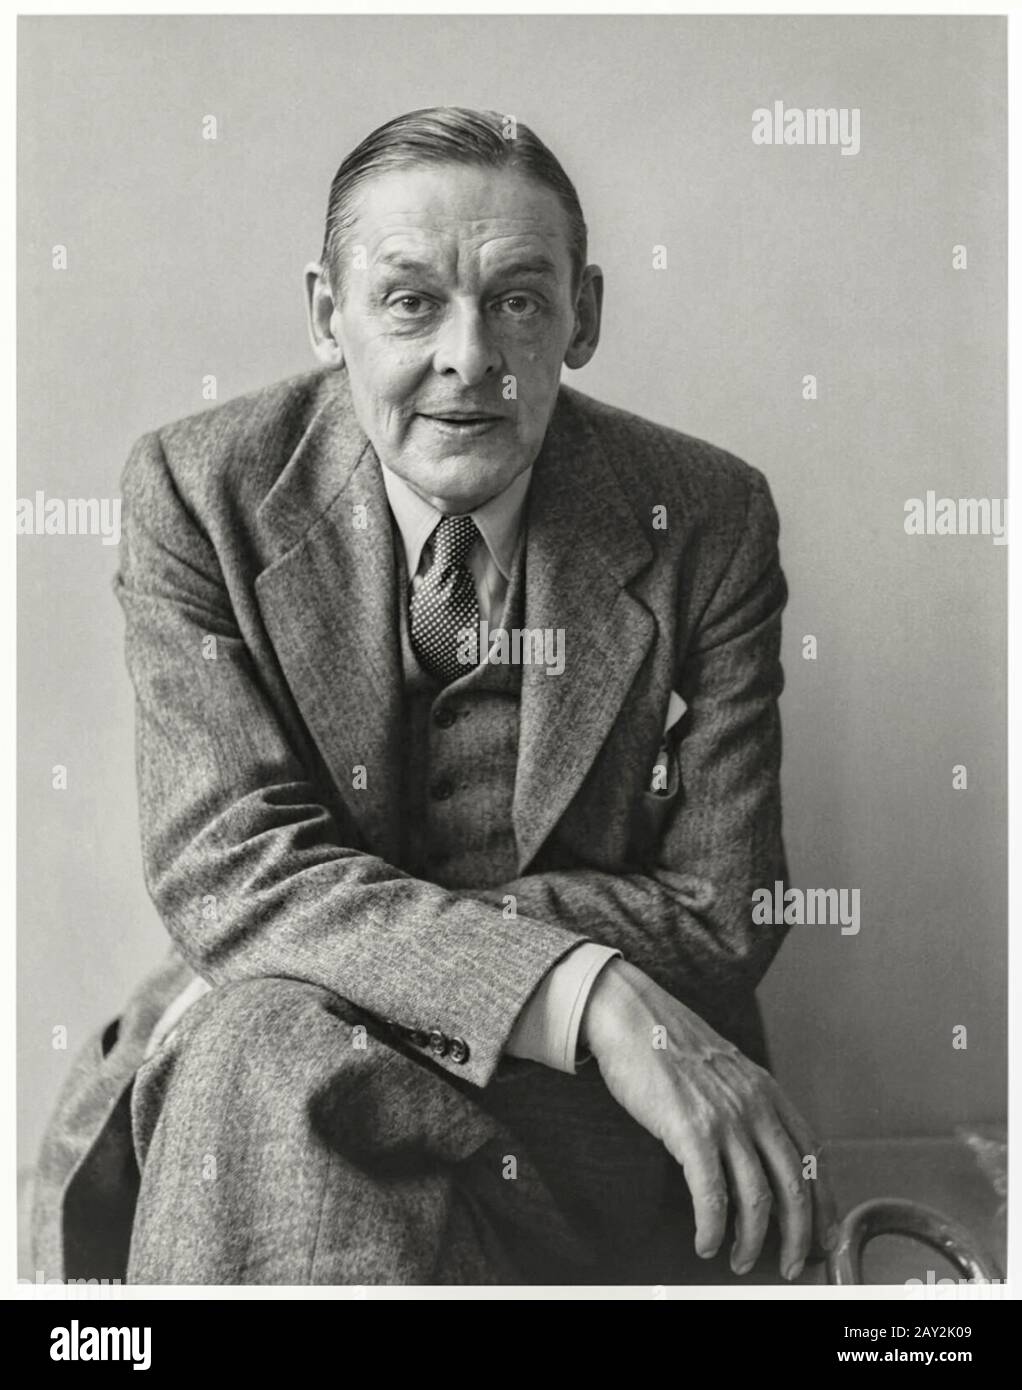 T. S. Eliot [Thomas Stearns Eliot] (1888-1965) British poet and writer best remembered for his modernist poem The Waste Land published in 1922 and winner of the Nobel Prize in Literature in 1948. See more information below. Stock Photo